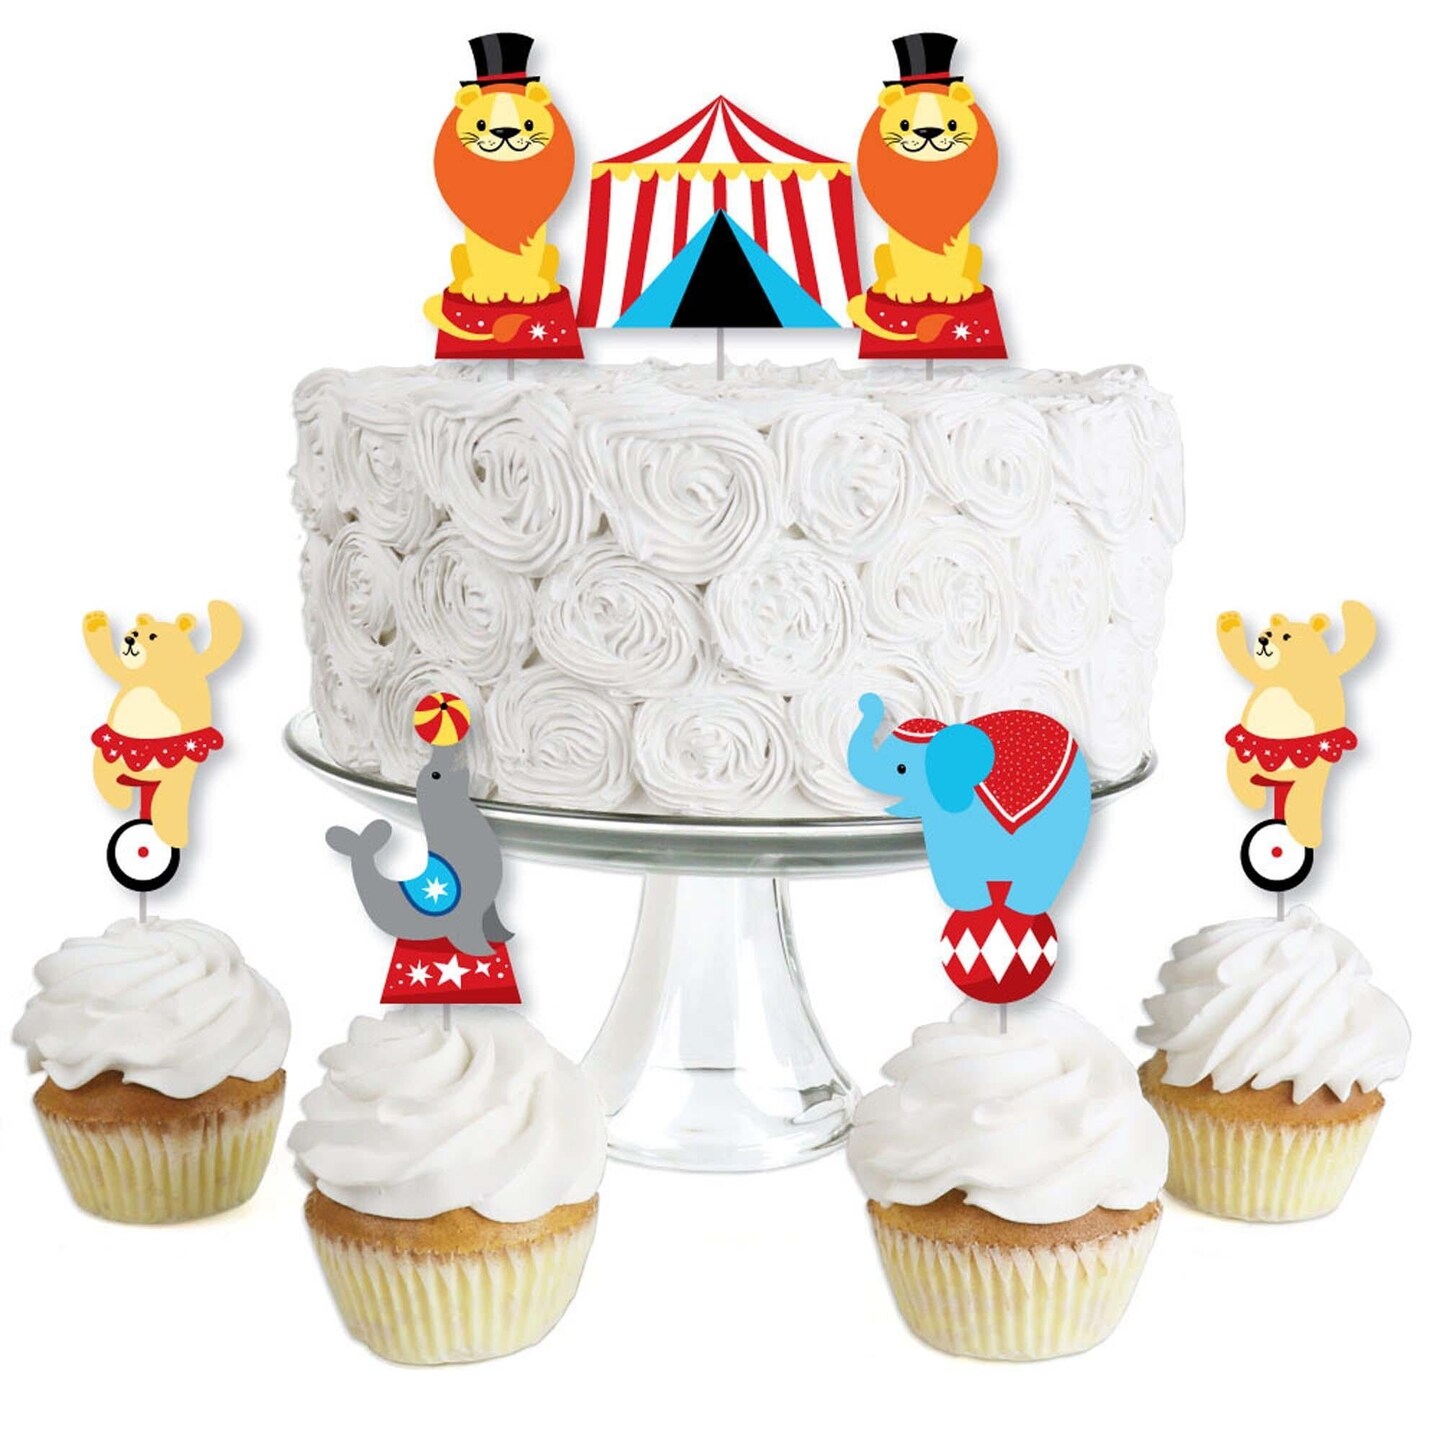 The Circus Troupe Cake Topper Set – The Party Archt.